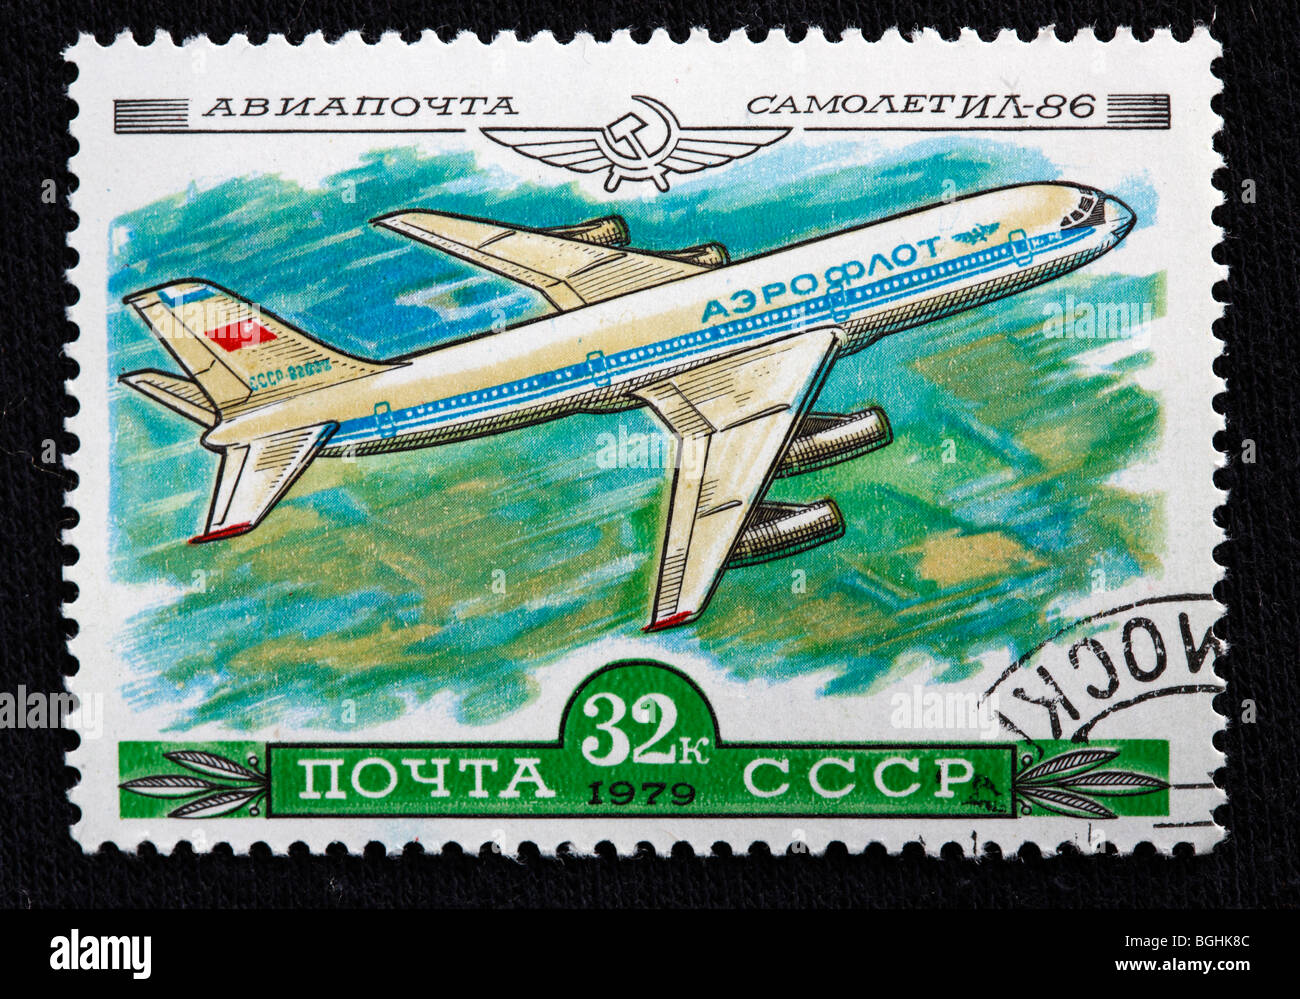 History of aviation, Russian plane IL-86, postage stamp, USSR, 1979 Stock Photo